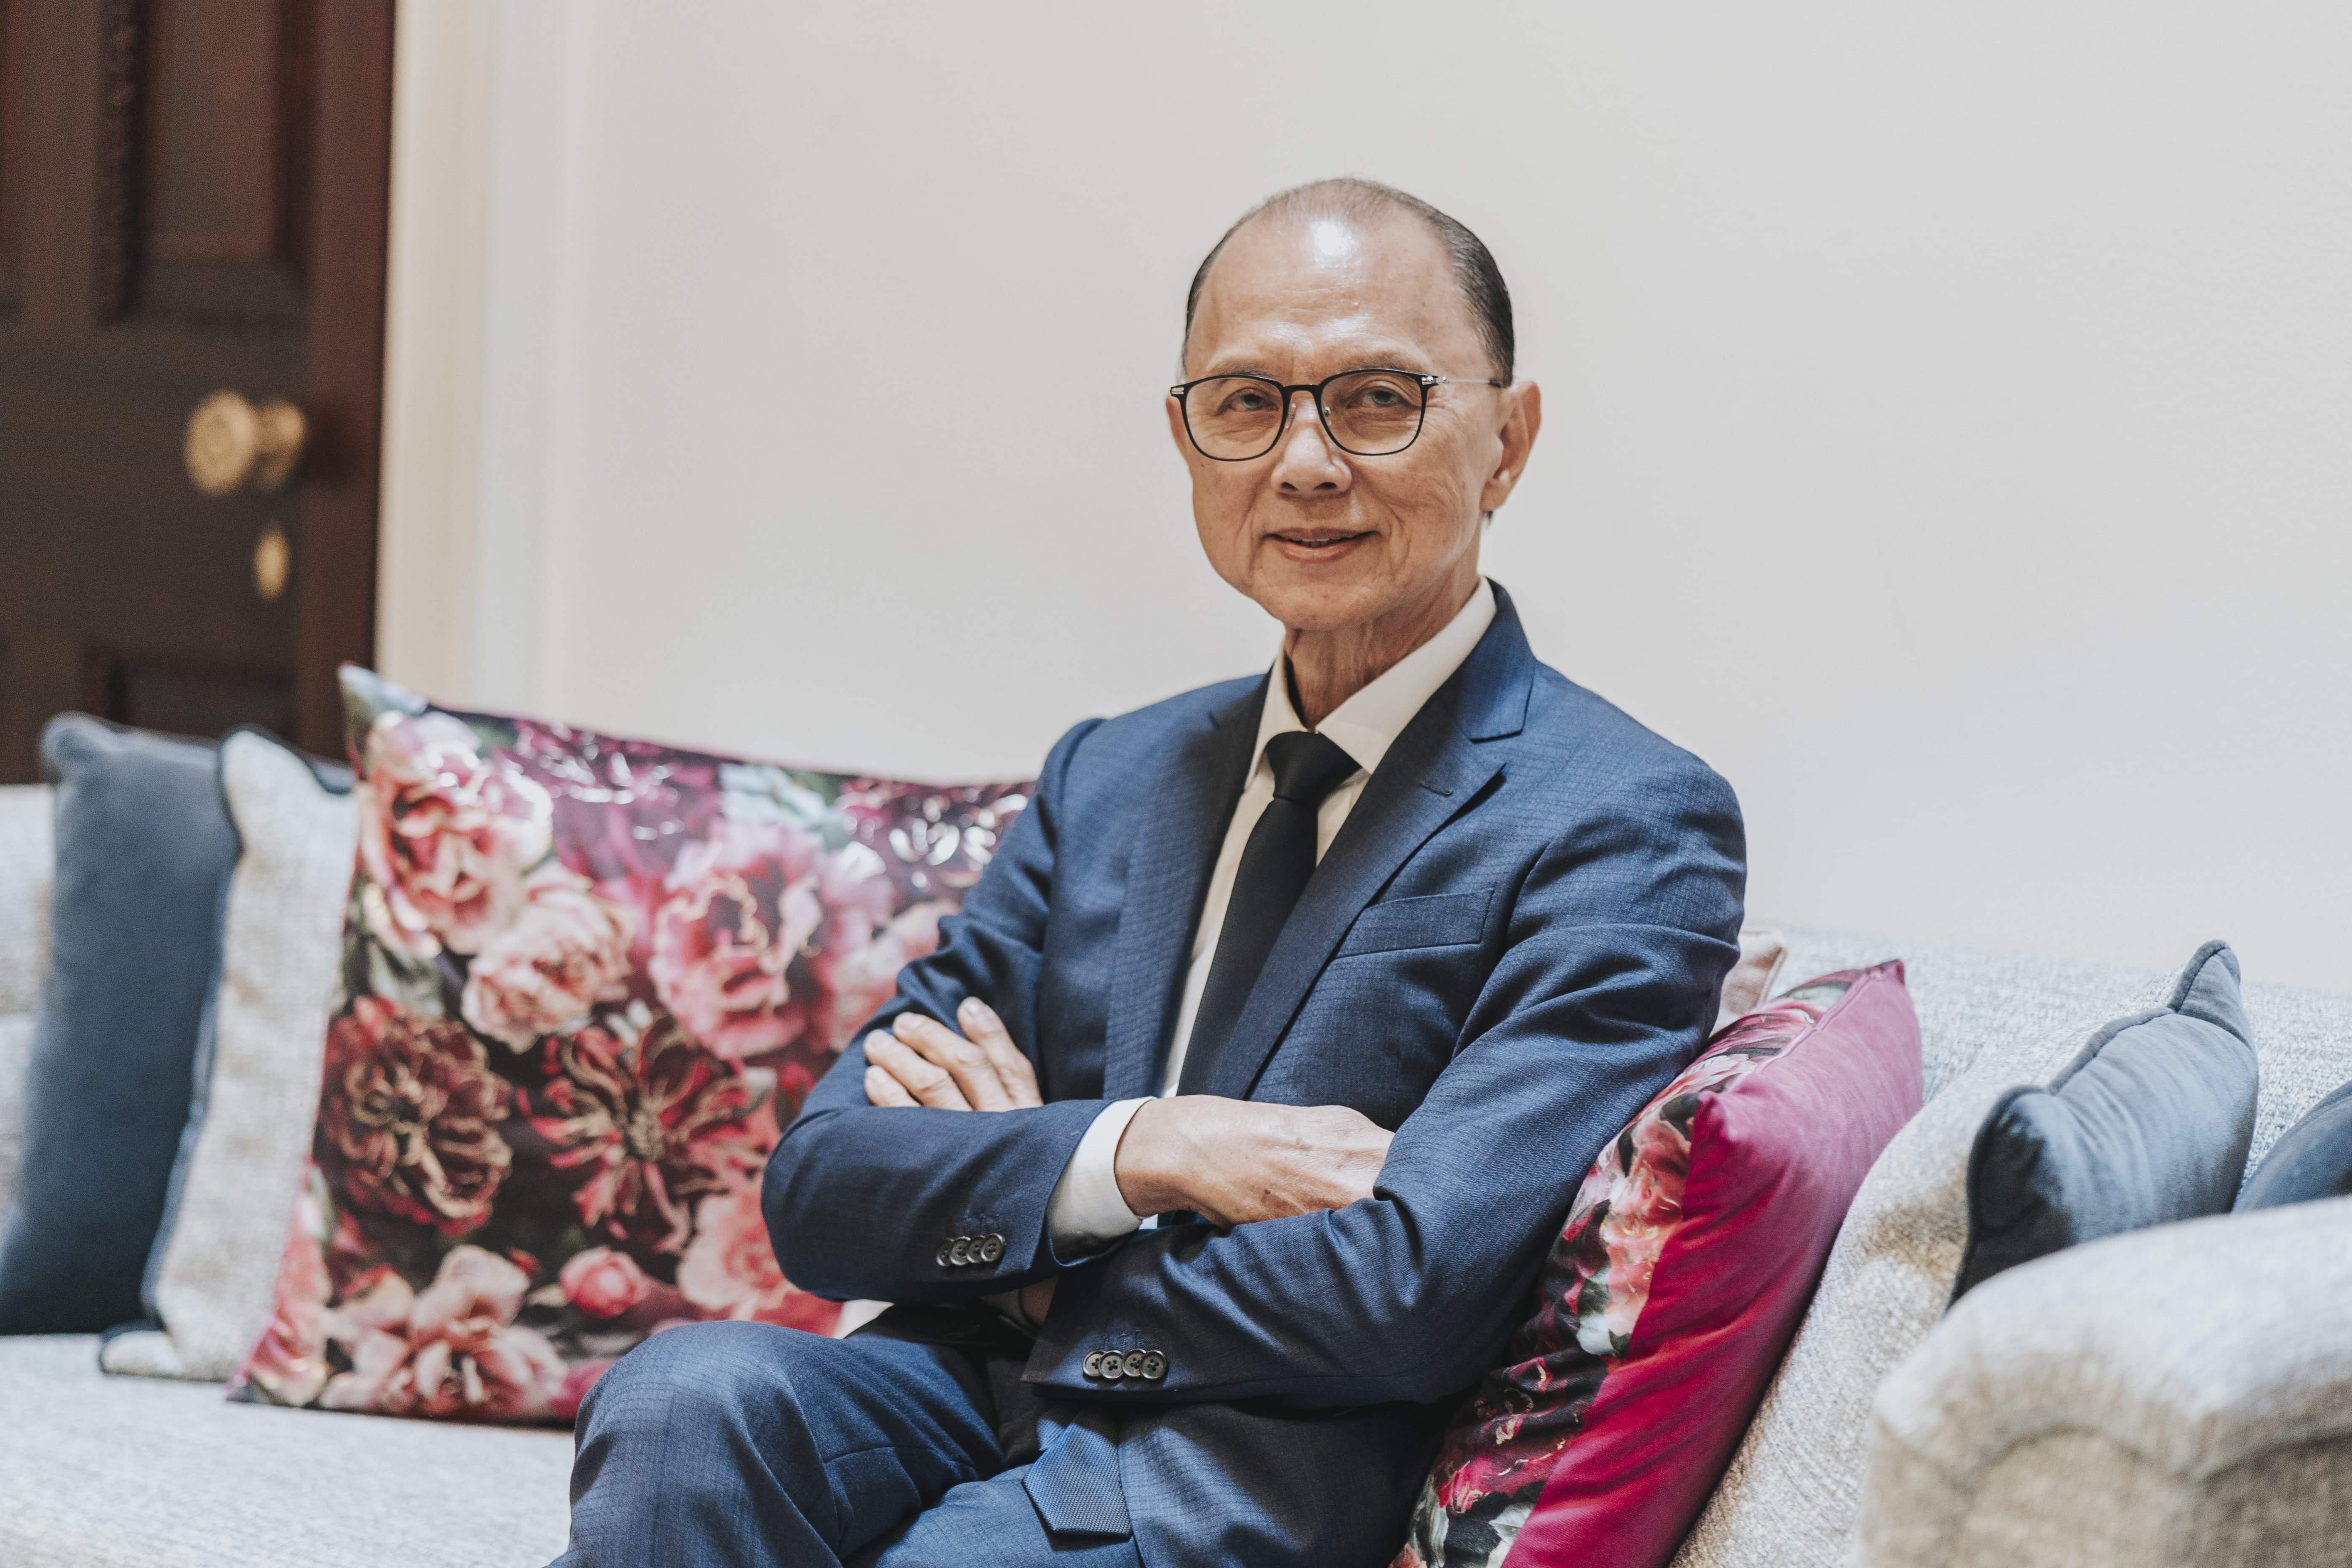 Couture shoe designer Jimmy Choo speaks to the media during the